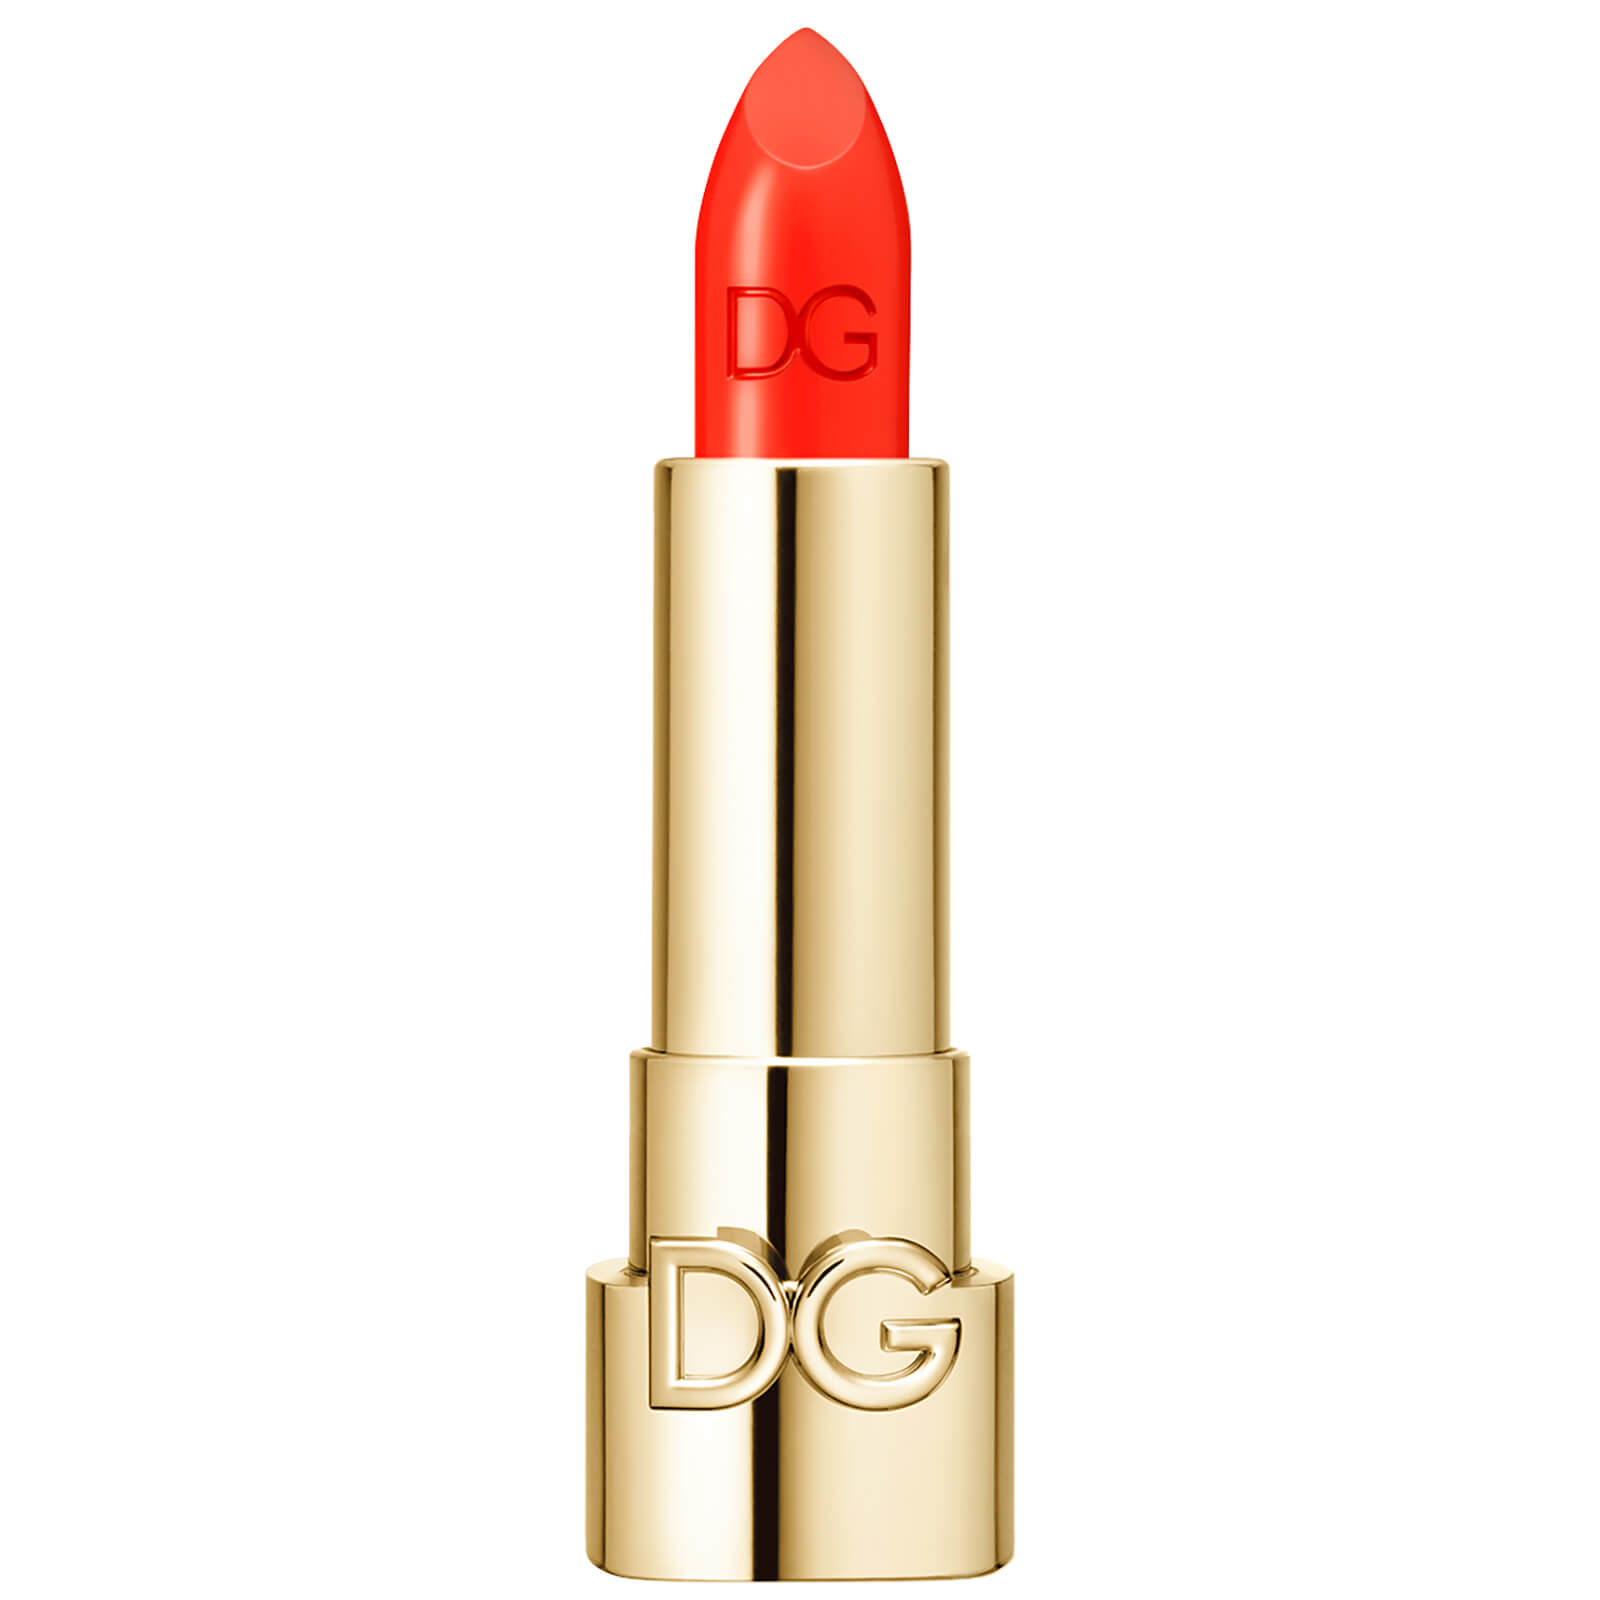 Dolce&Gabbana Too Sheer Lipstick 3.5g (Various Shades) - Sunkissed Coral 505